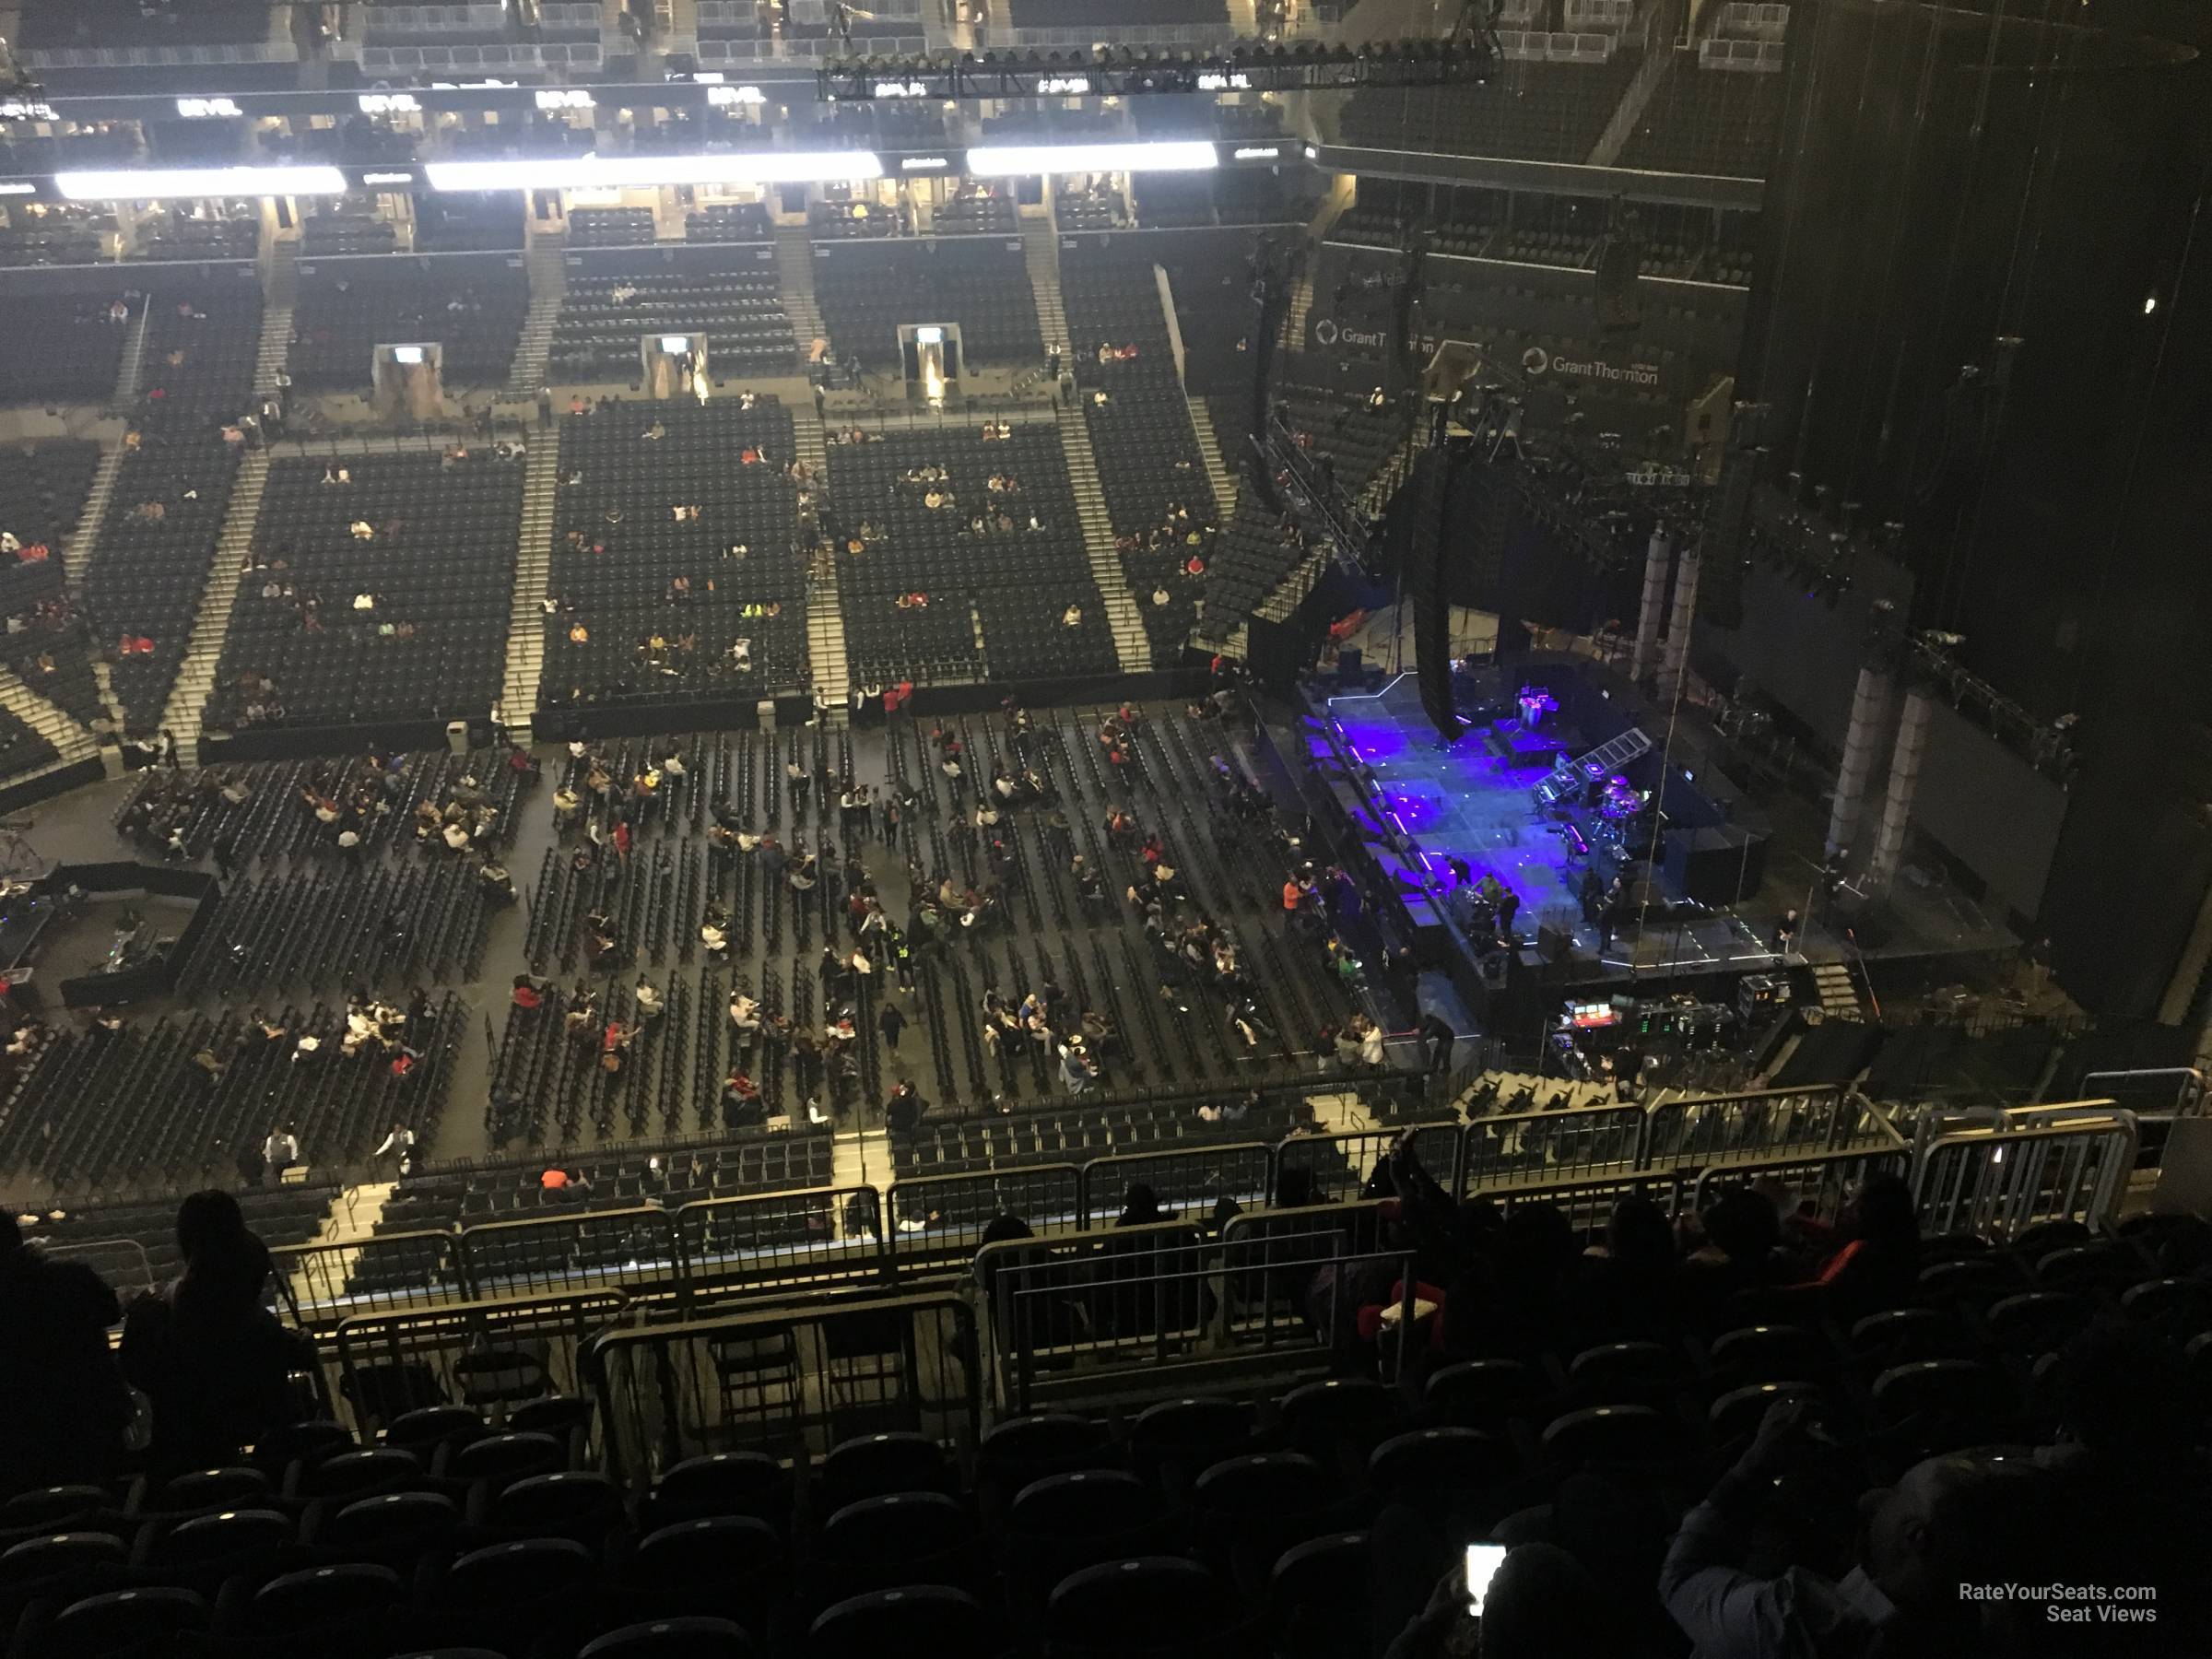 Barclays Center Section 207 Concert Seating